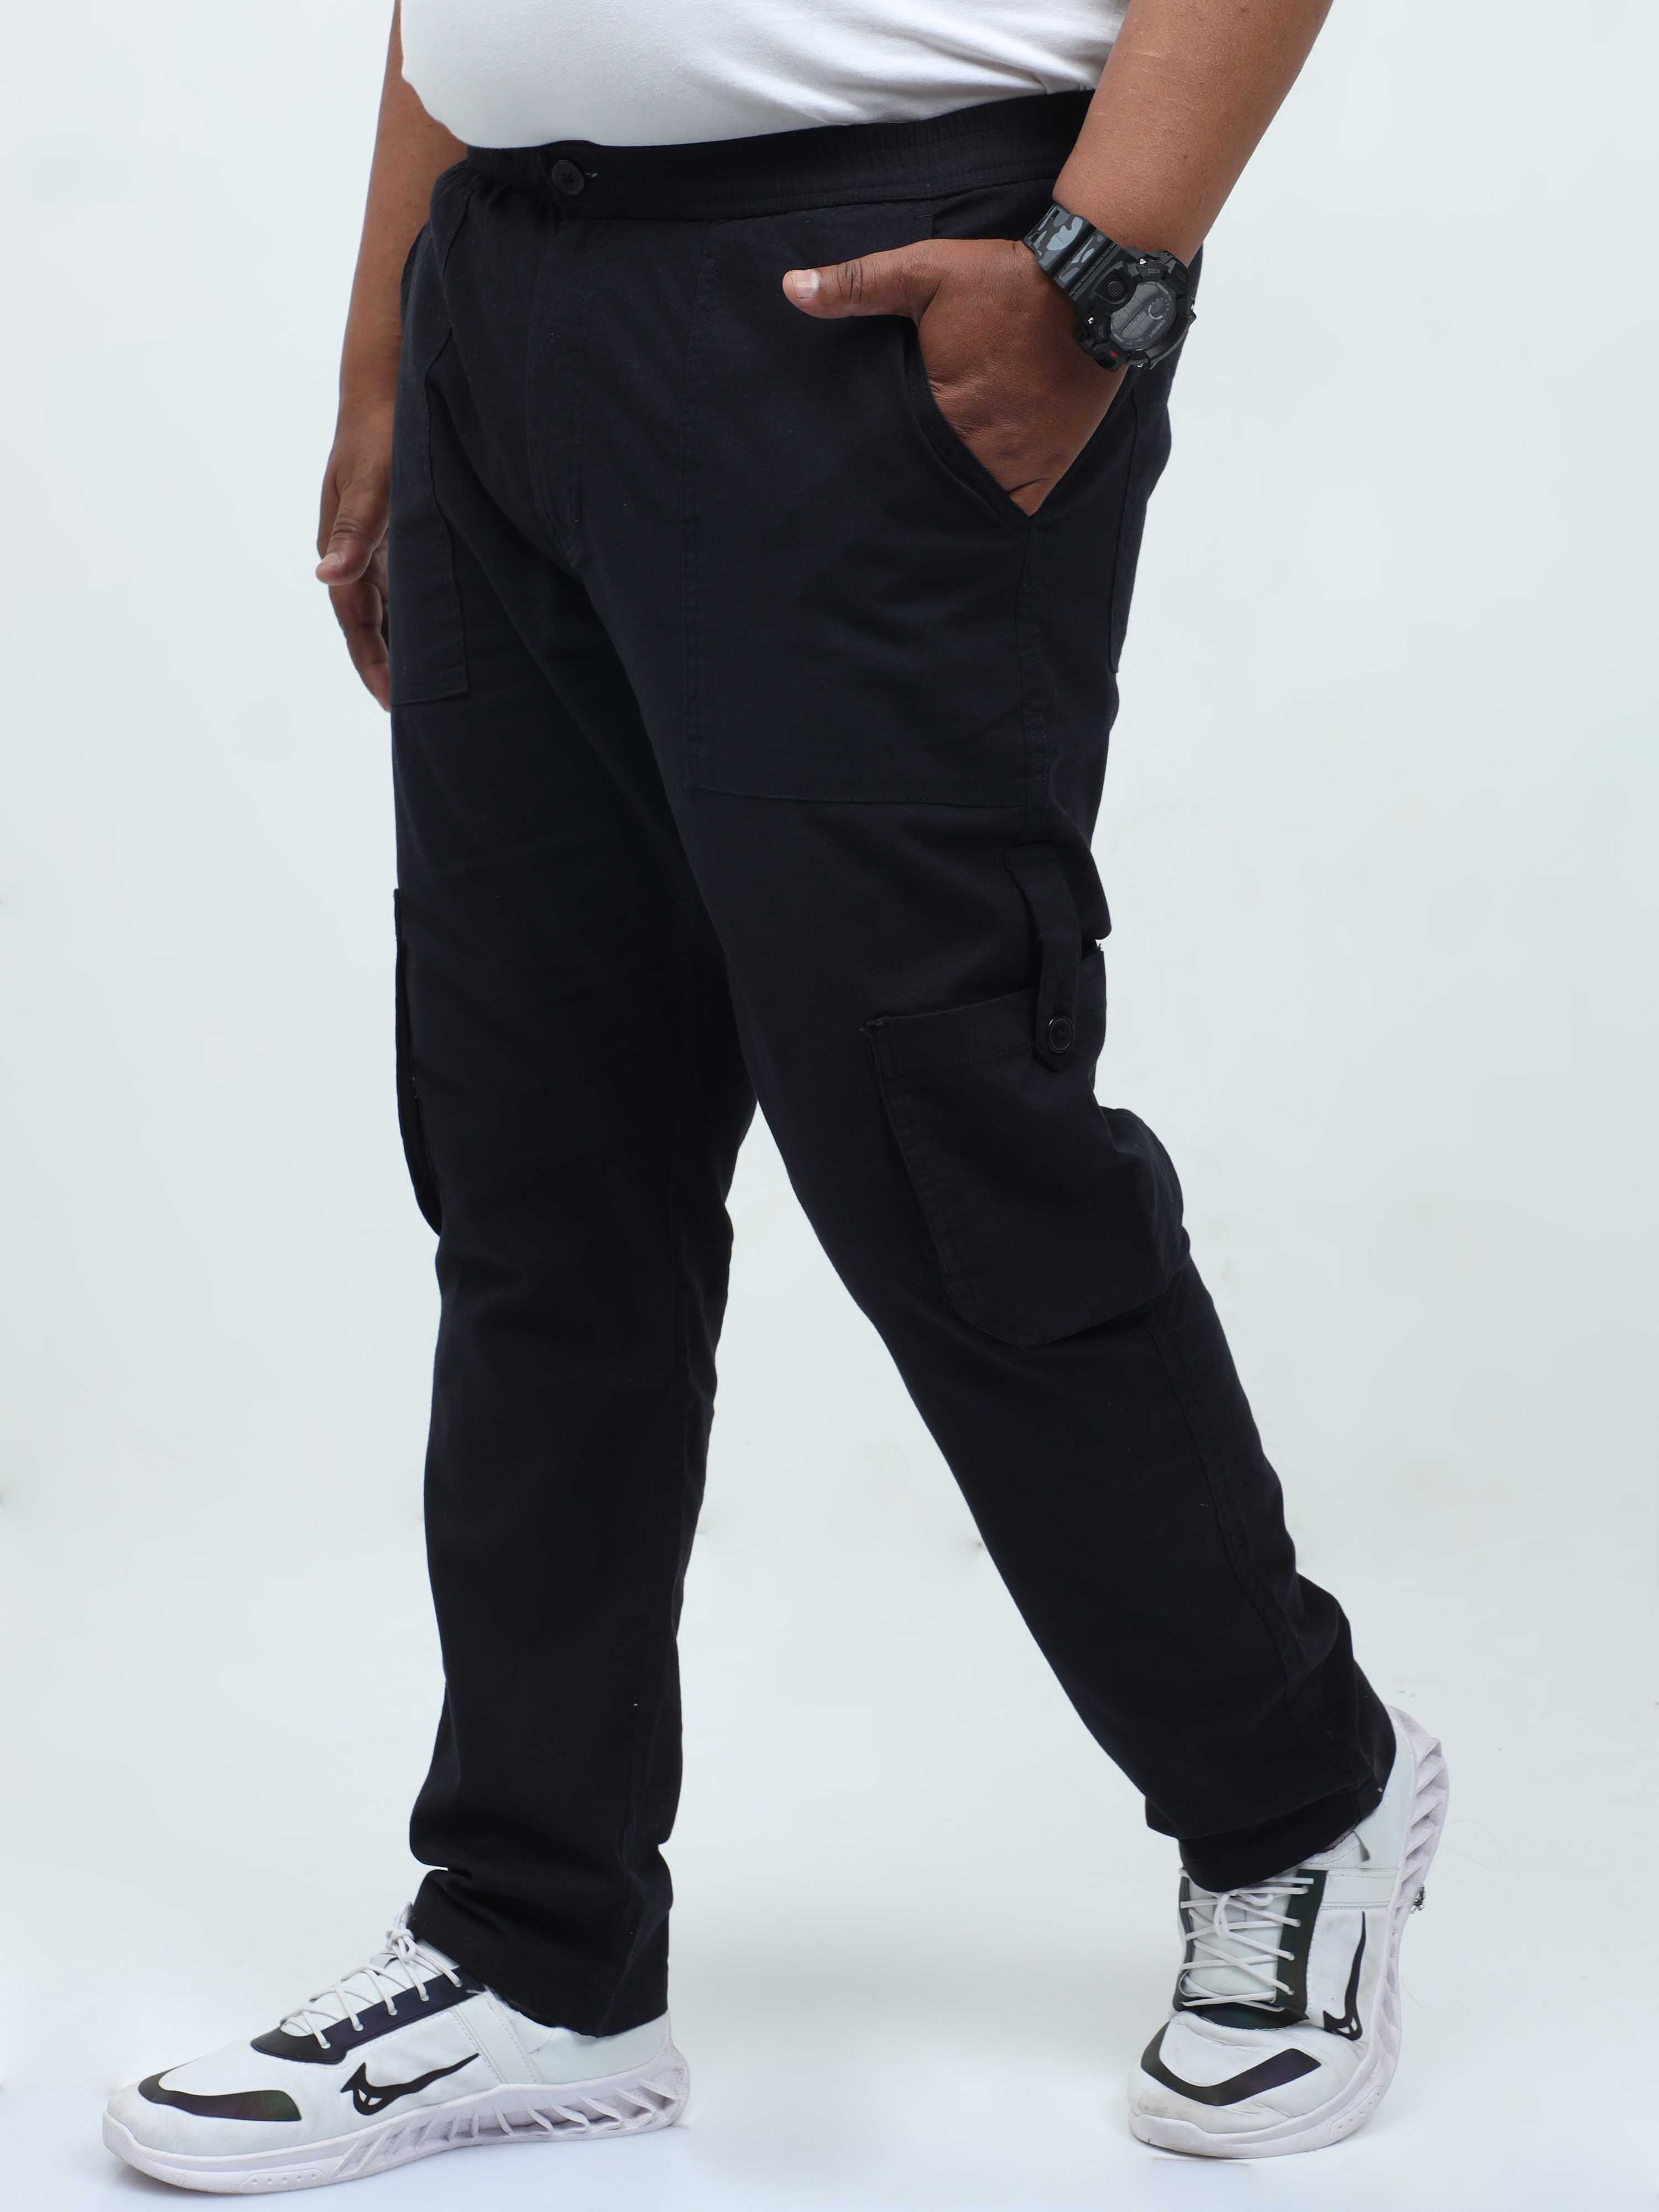 New cargo pants delivery on your home - Men - 1763380704